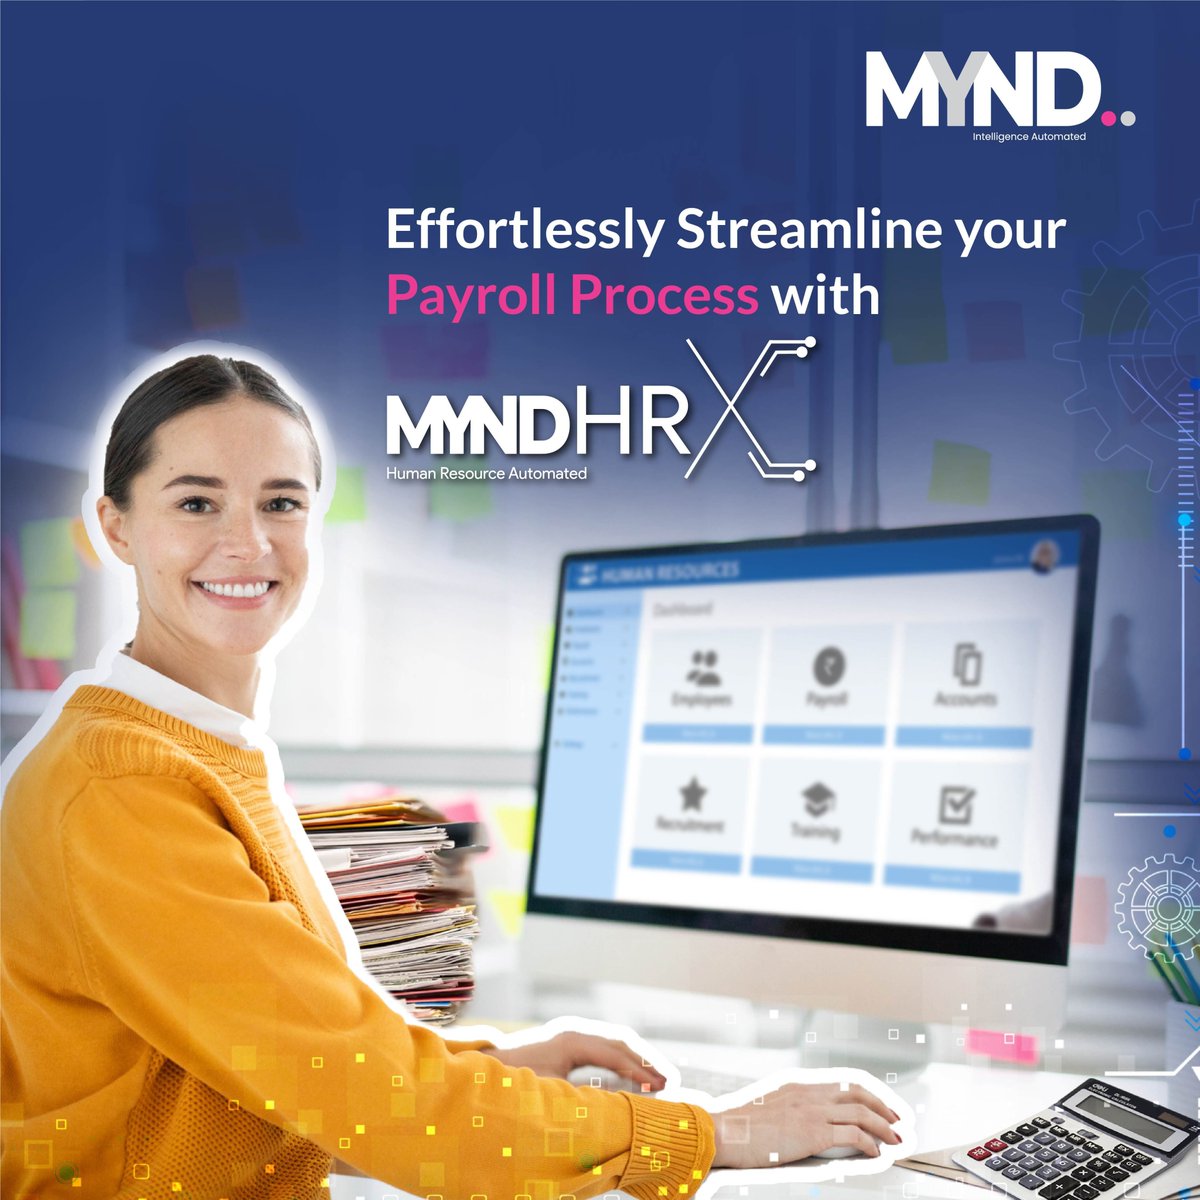 Say goodbye to payroll stress!
Focus on your business while we handle your payroll needs.
Intelligence Automated...
.
.
.

#RethinkWithMynd #PayrollManagement #EfficiencyAtWork #SimplifyPayroll #BusinessServices